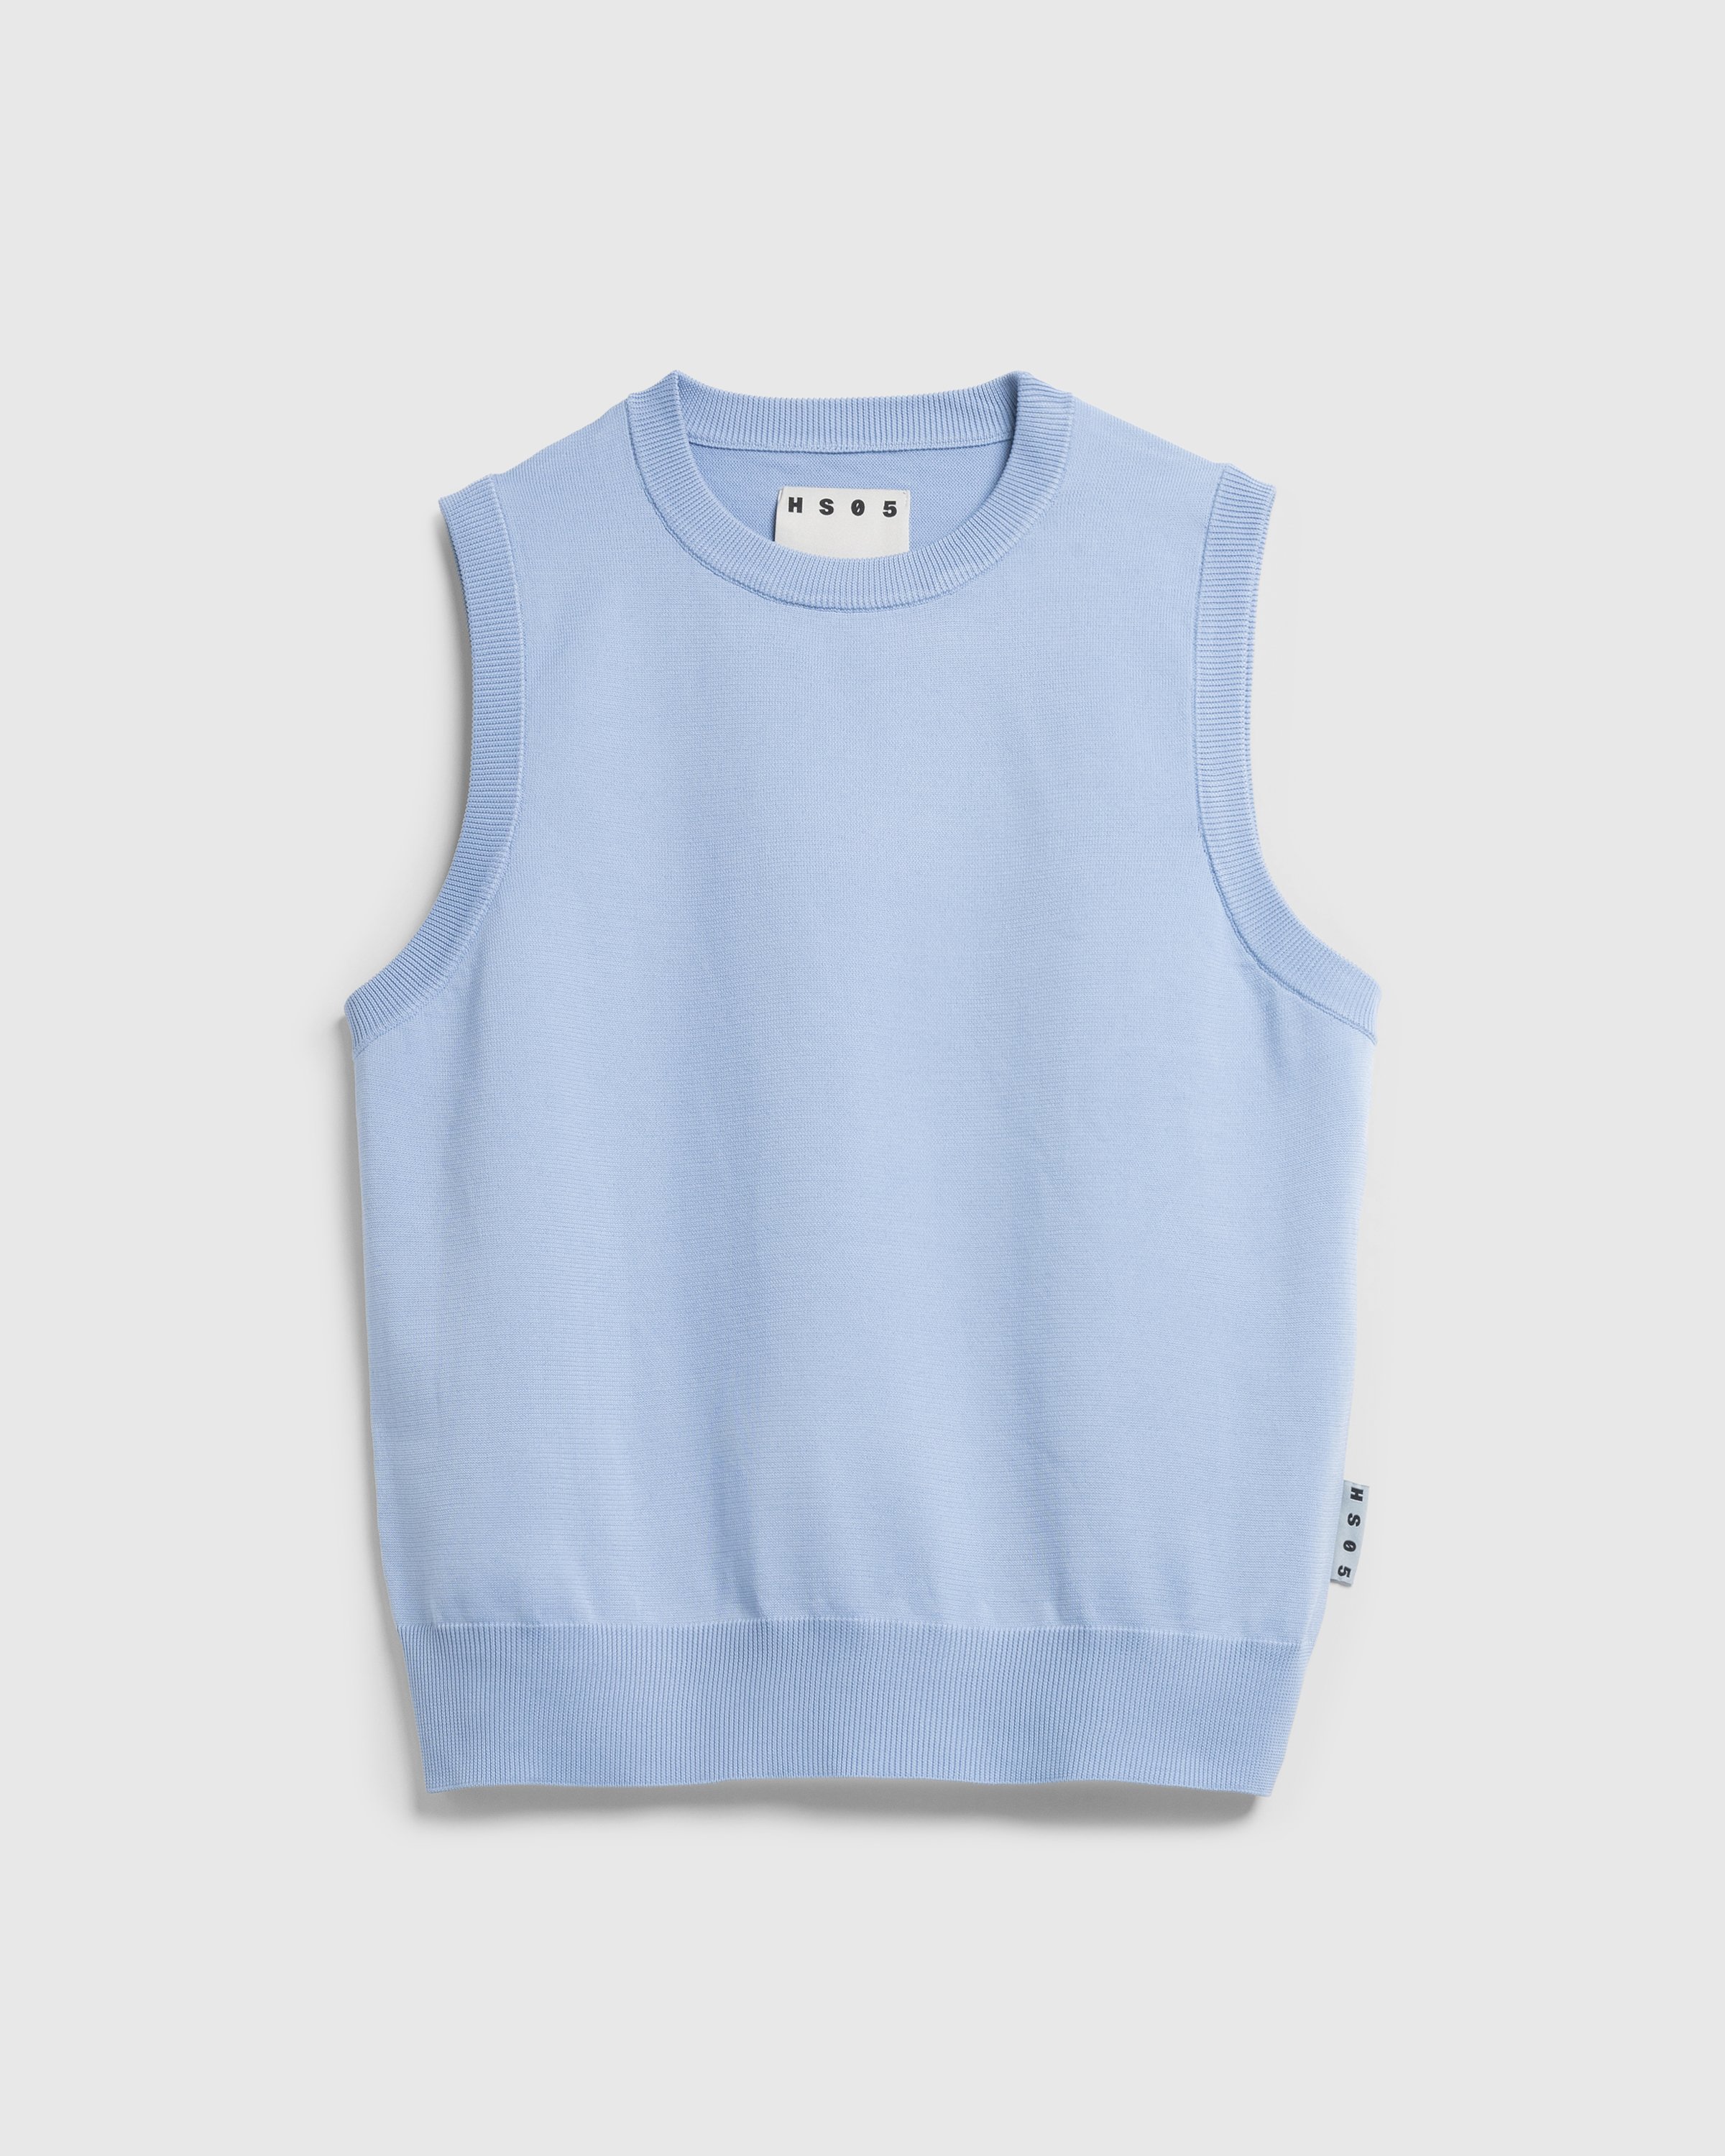 Highsnobiety HS05 - Poly Knit Tank Top - Clothing - Blue - Image 1